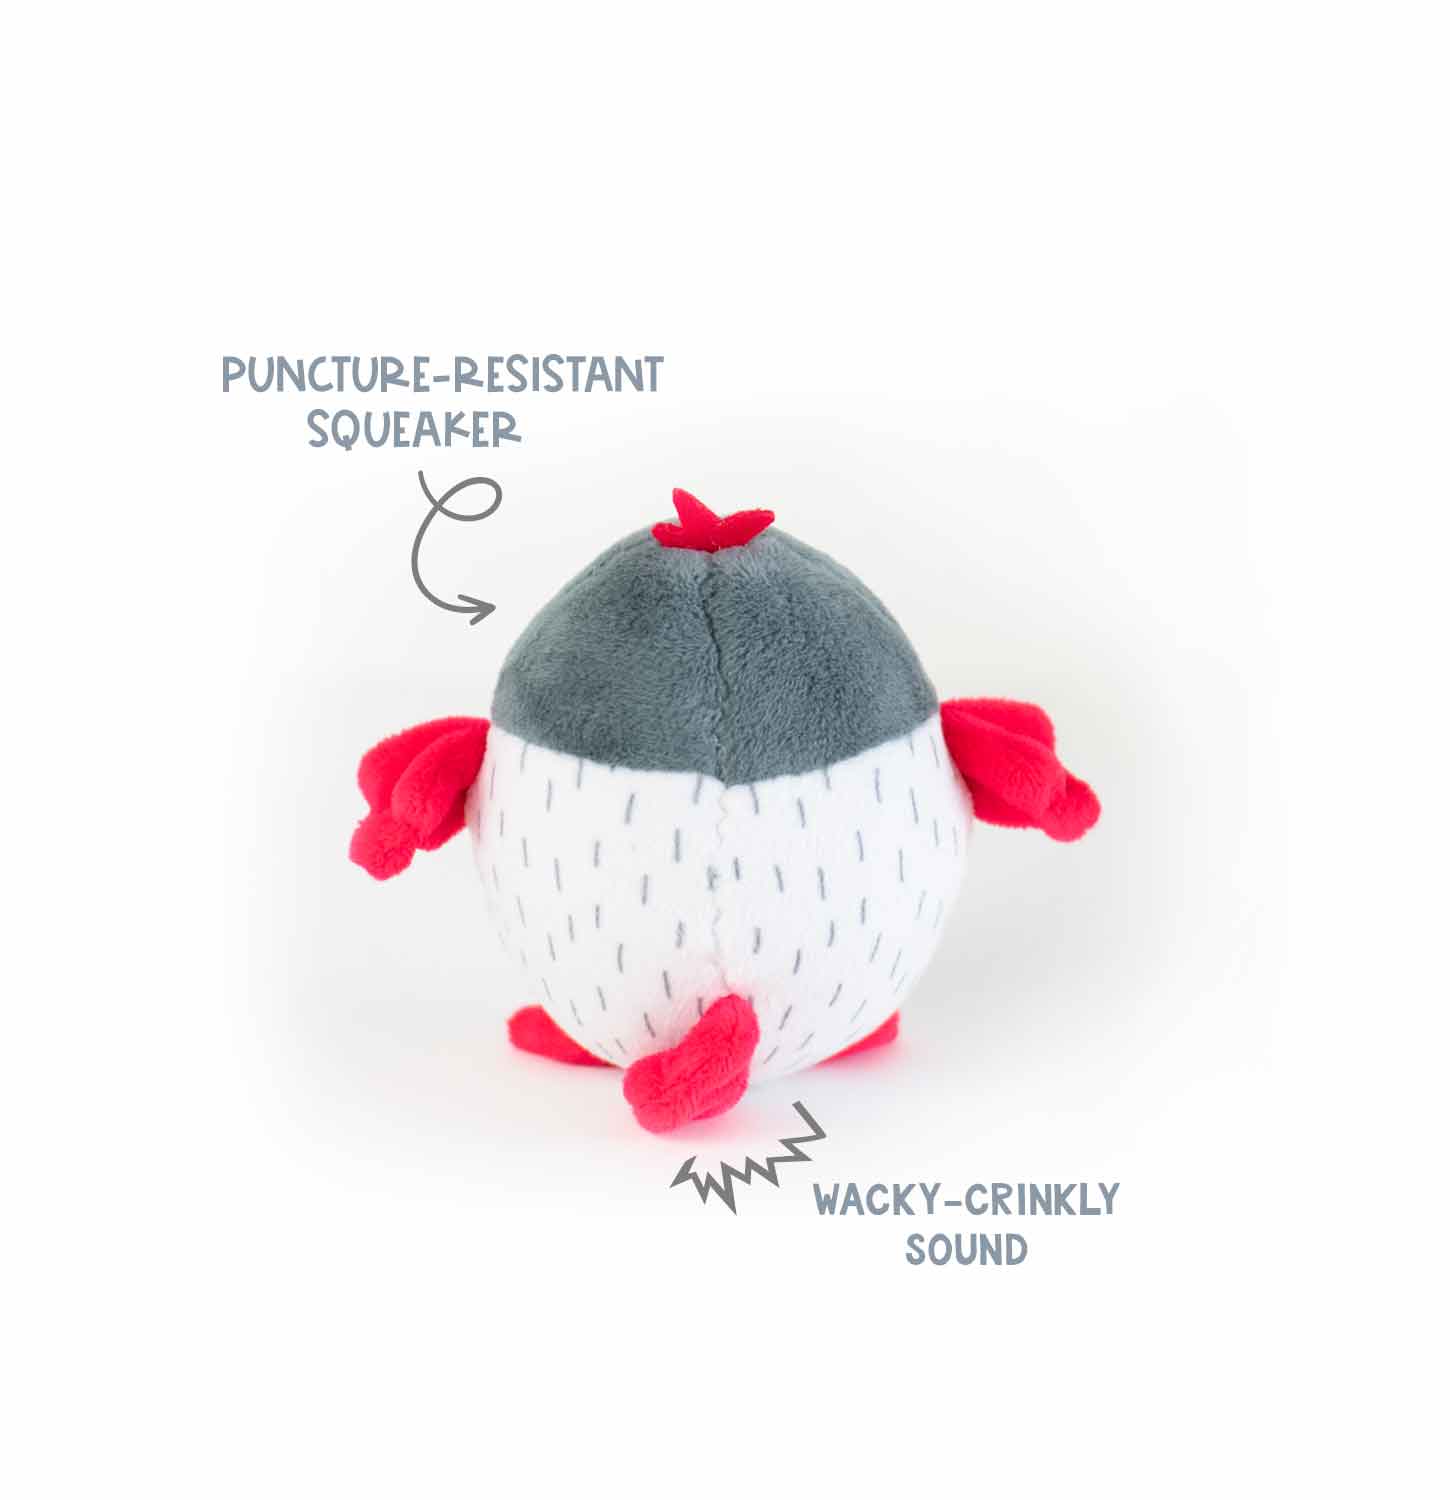 Squeaky plush bird dog toy featuring puncture-resistant squeaker and wacky crinkly sound